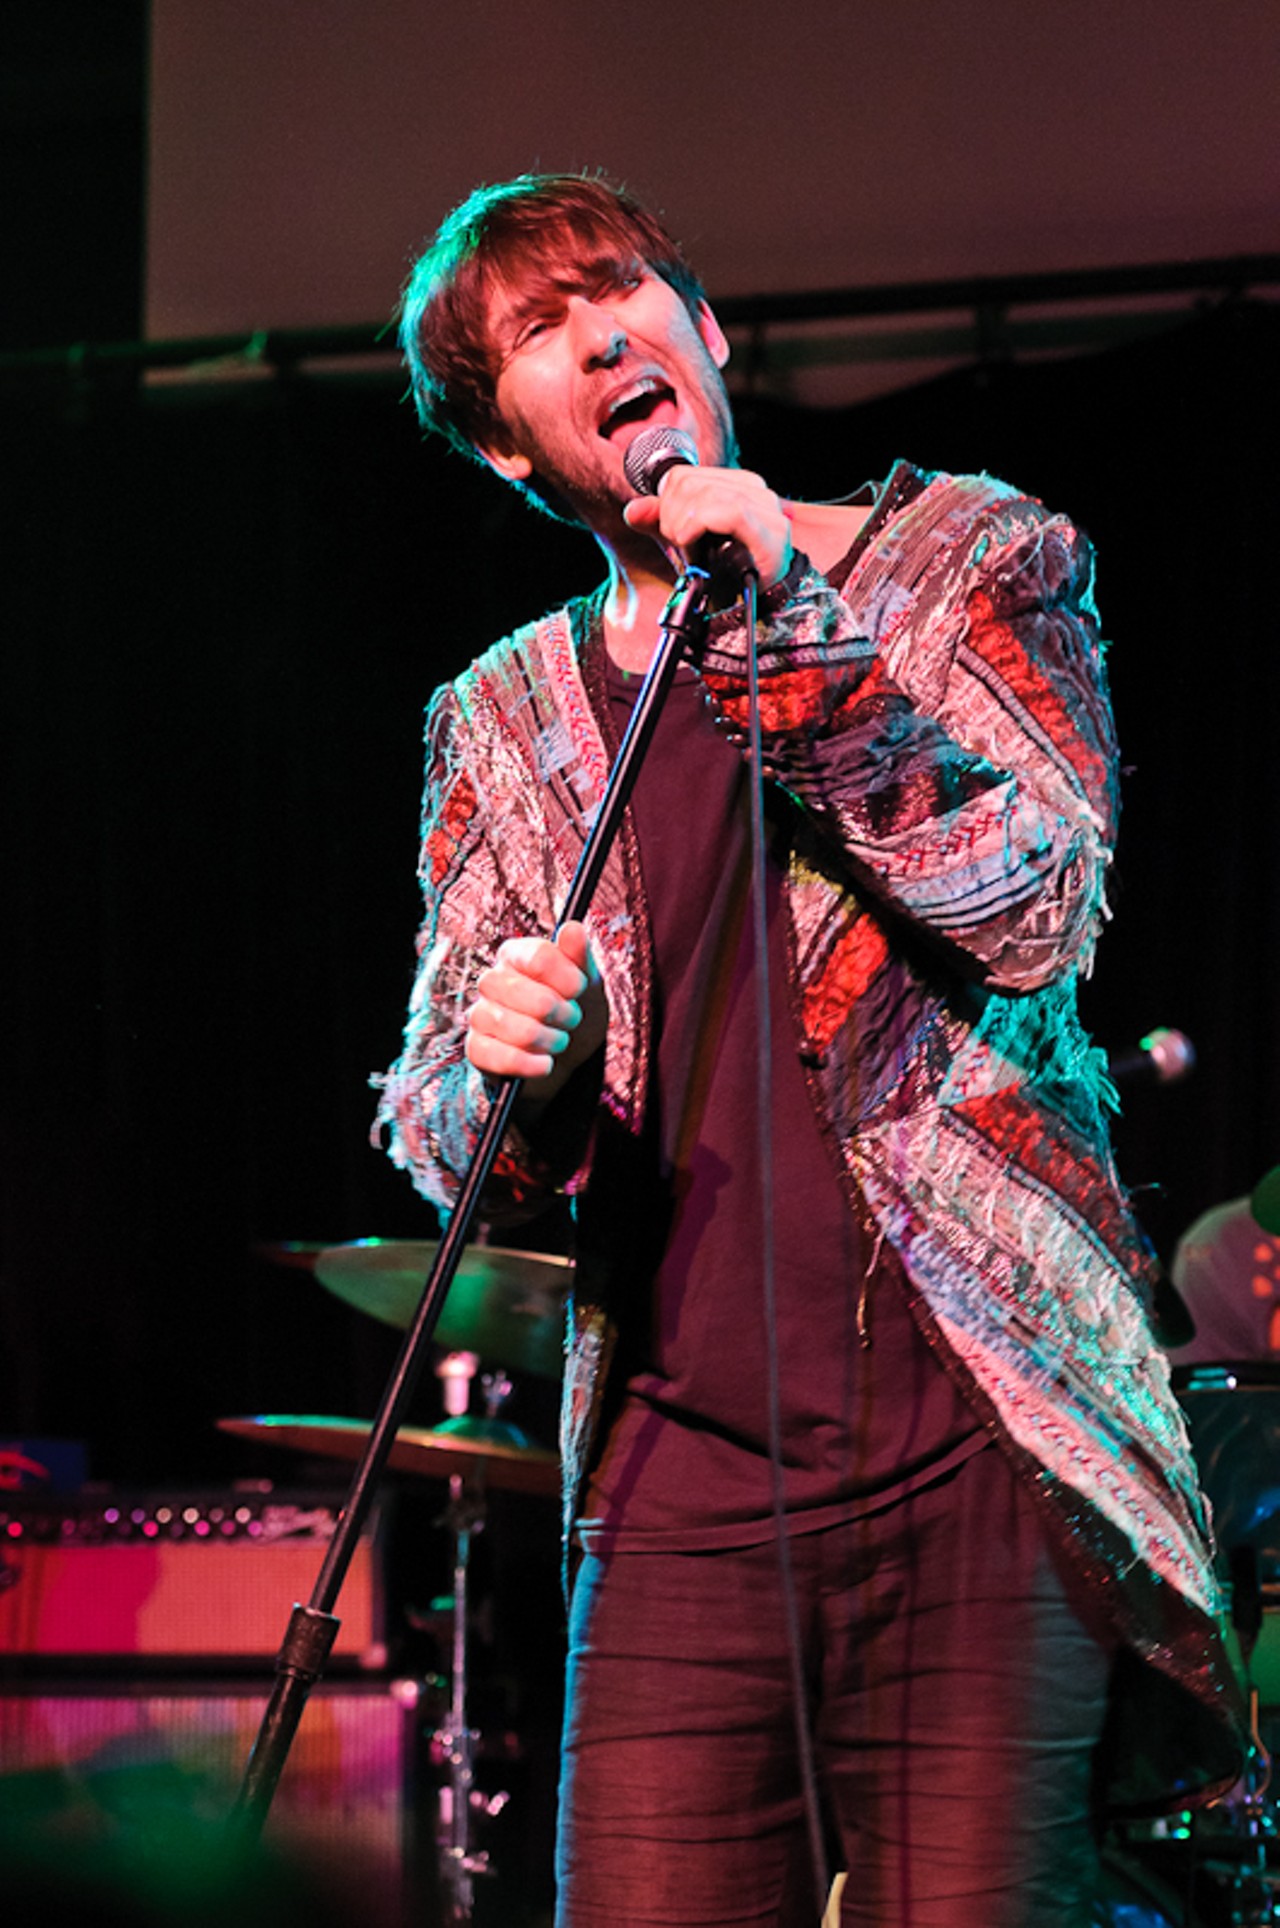 Jamie Lidell performing at The Old Rock House.